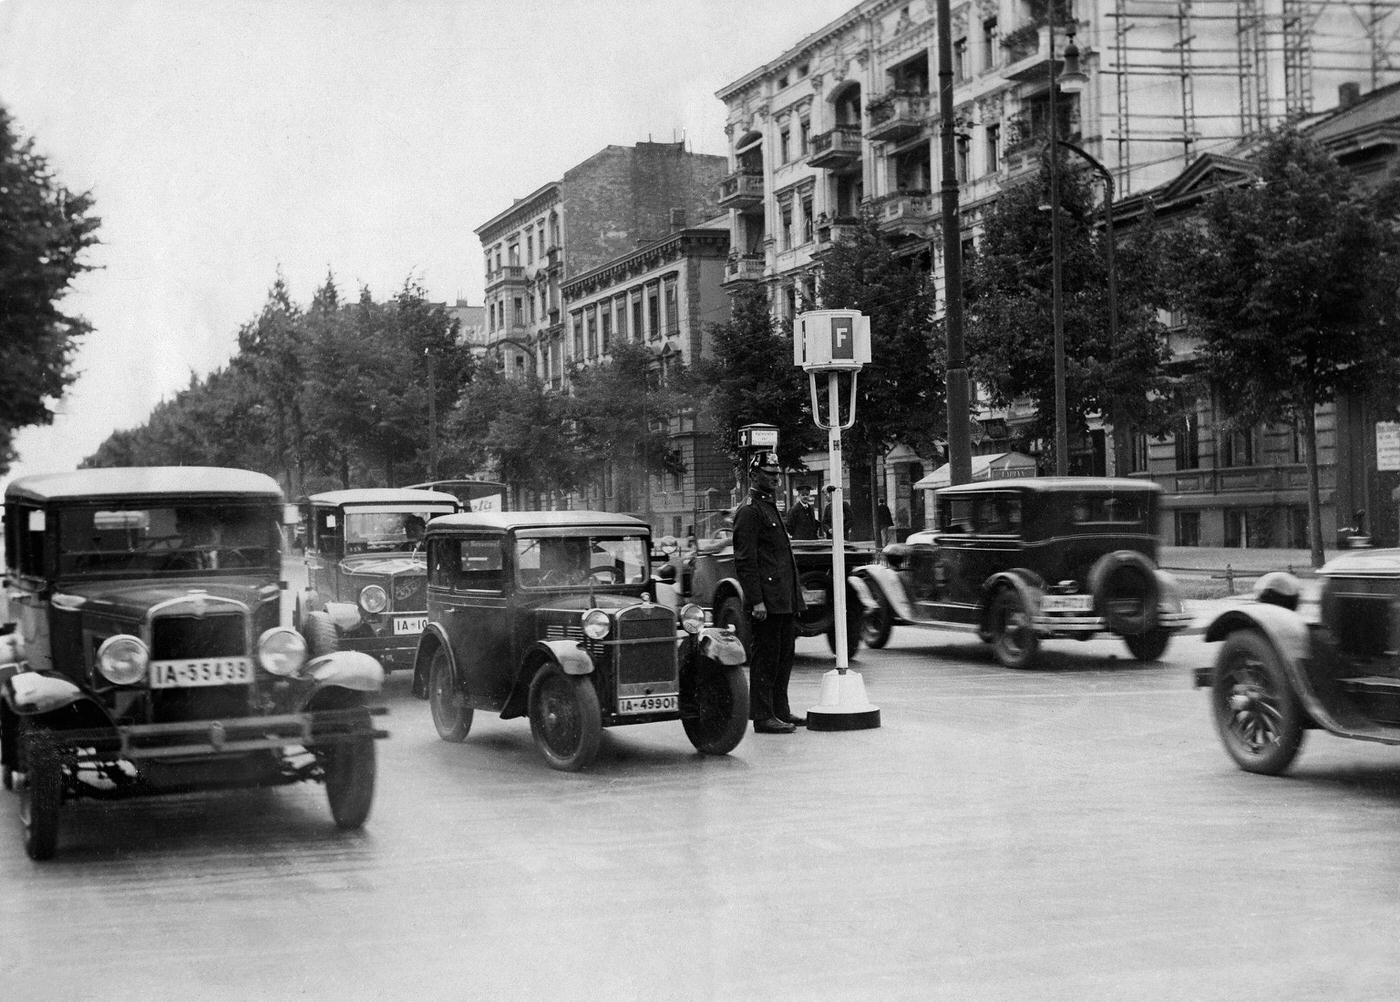 Germany, Berlin: Policeman controlling the traffic at a road sign in the 'Bismarckstrasse/Leibnizstrasse,' Berlin, 1930